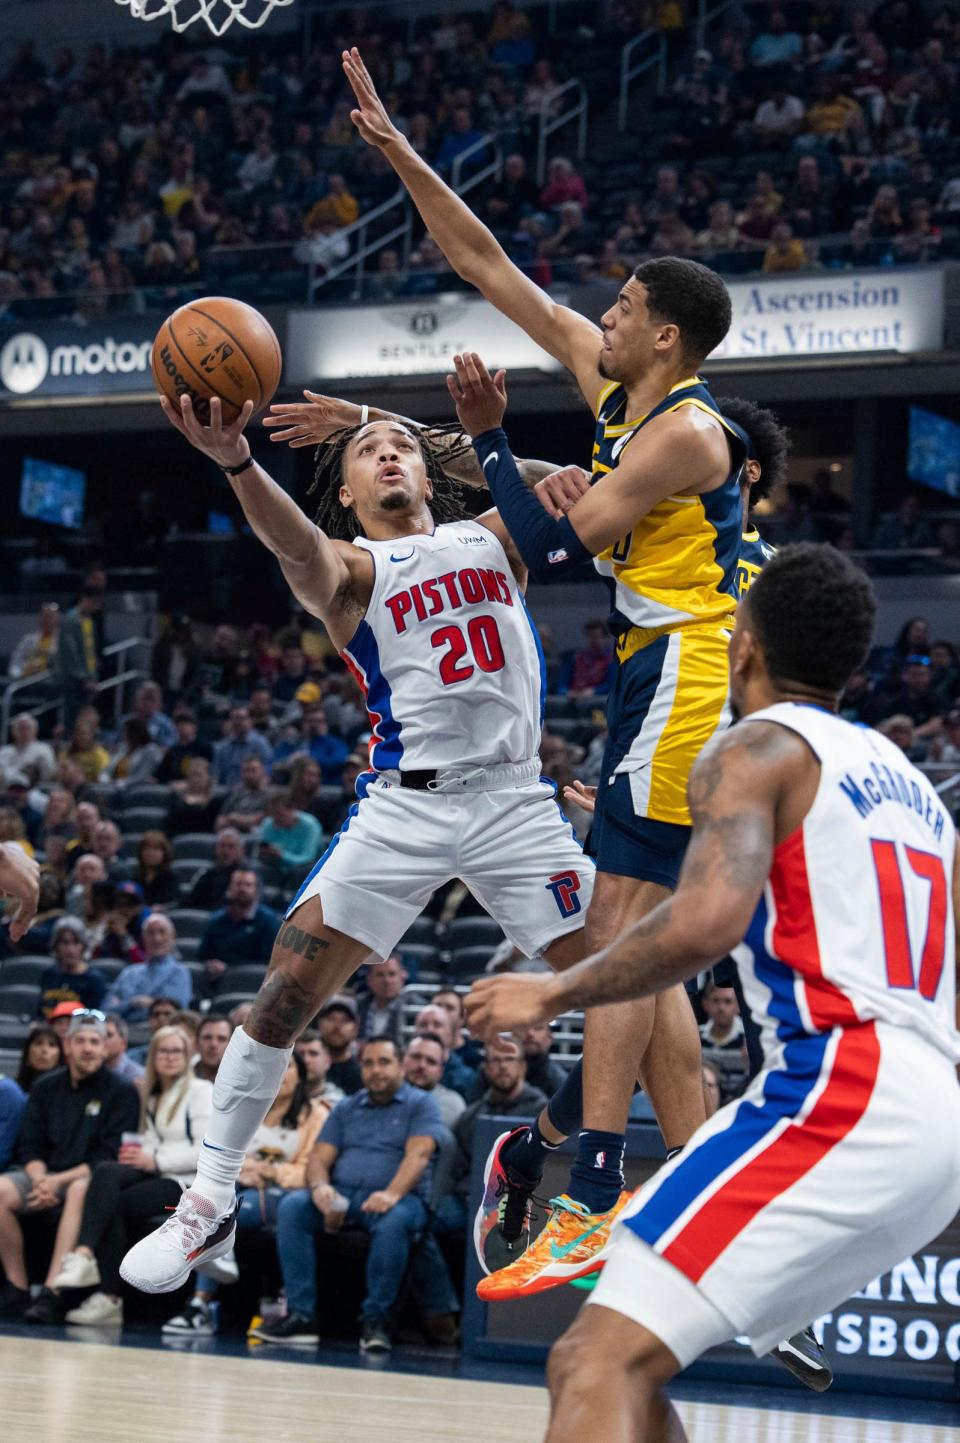 Detroit Pistons gaurd Carson Edwards (20) shoots the ball while Indiana Pacers guard Tyrese Haliburton (0) defends in the first half at Gainbridge Fieldhouse in Indianapolis on Sunday, April 3, 2022.